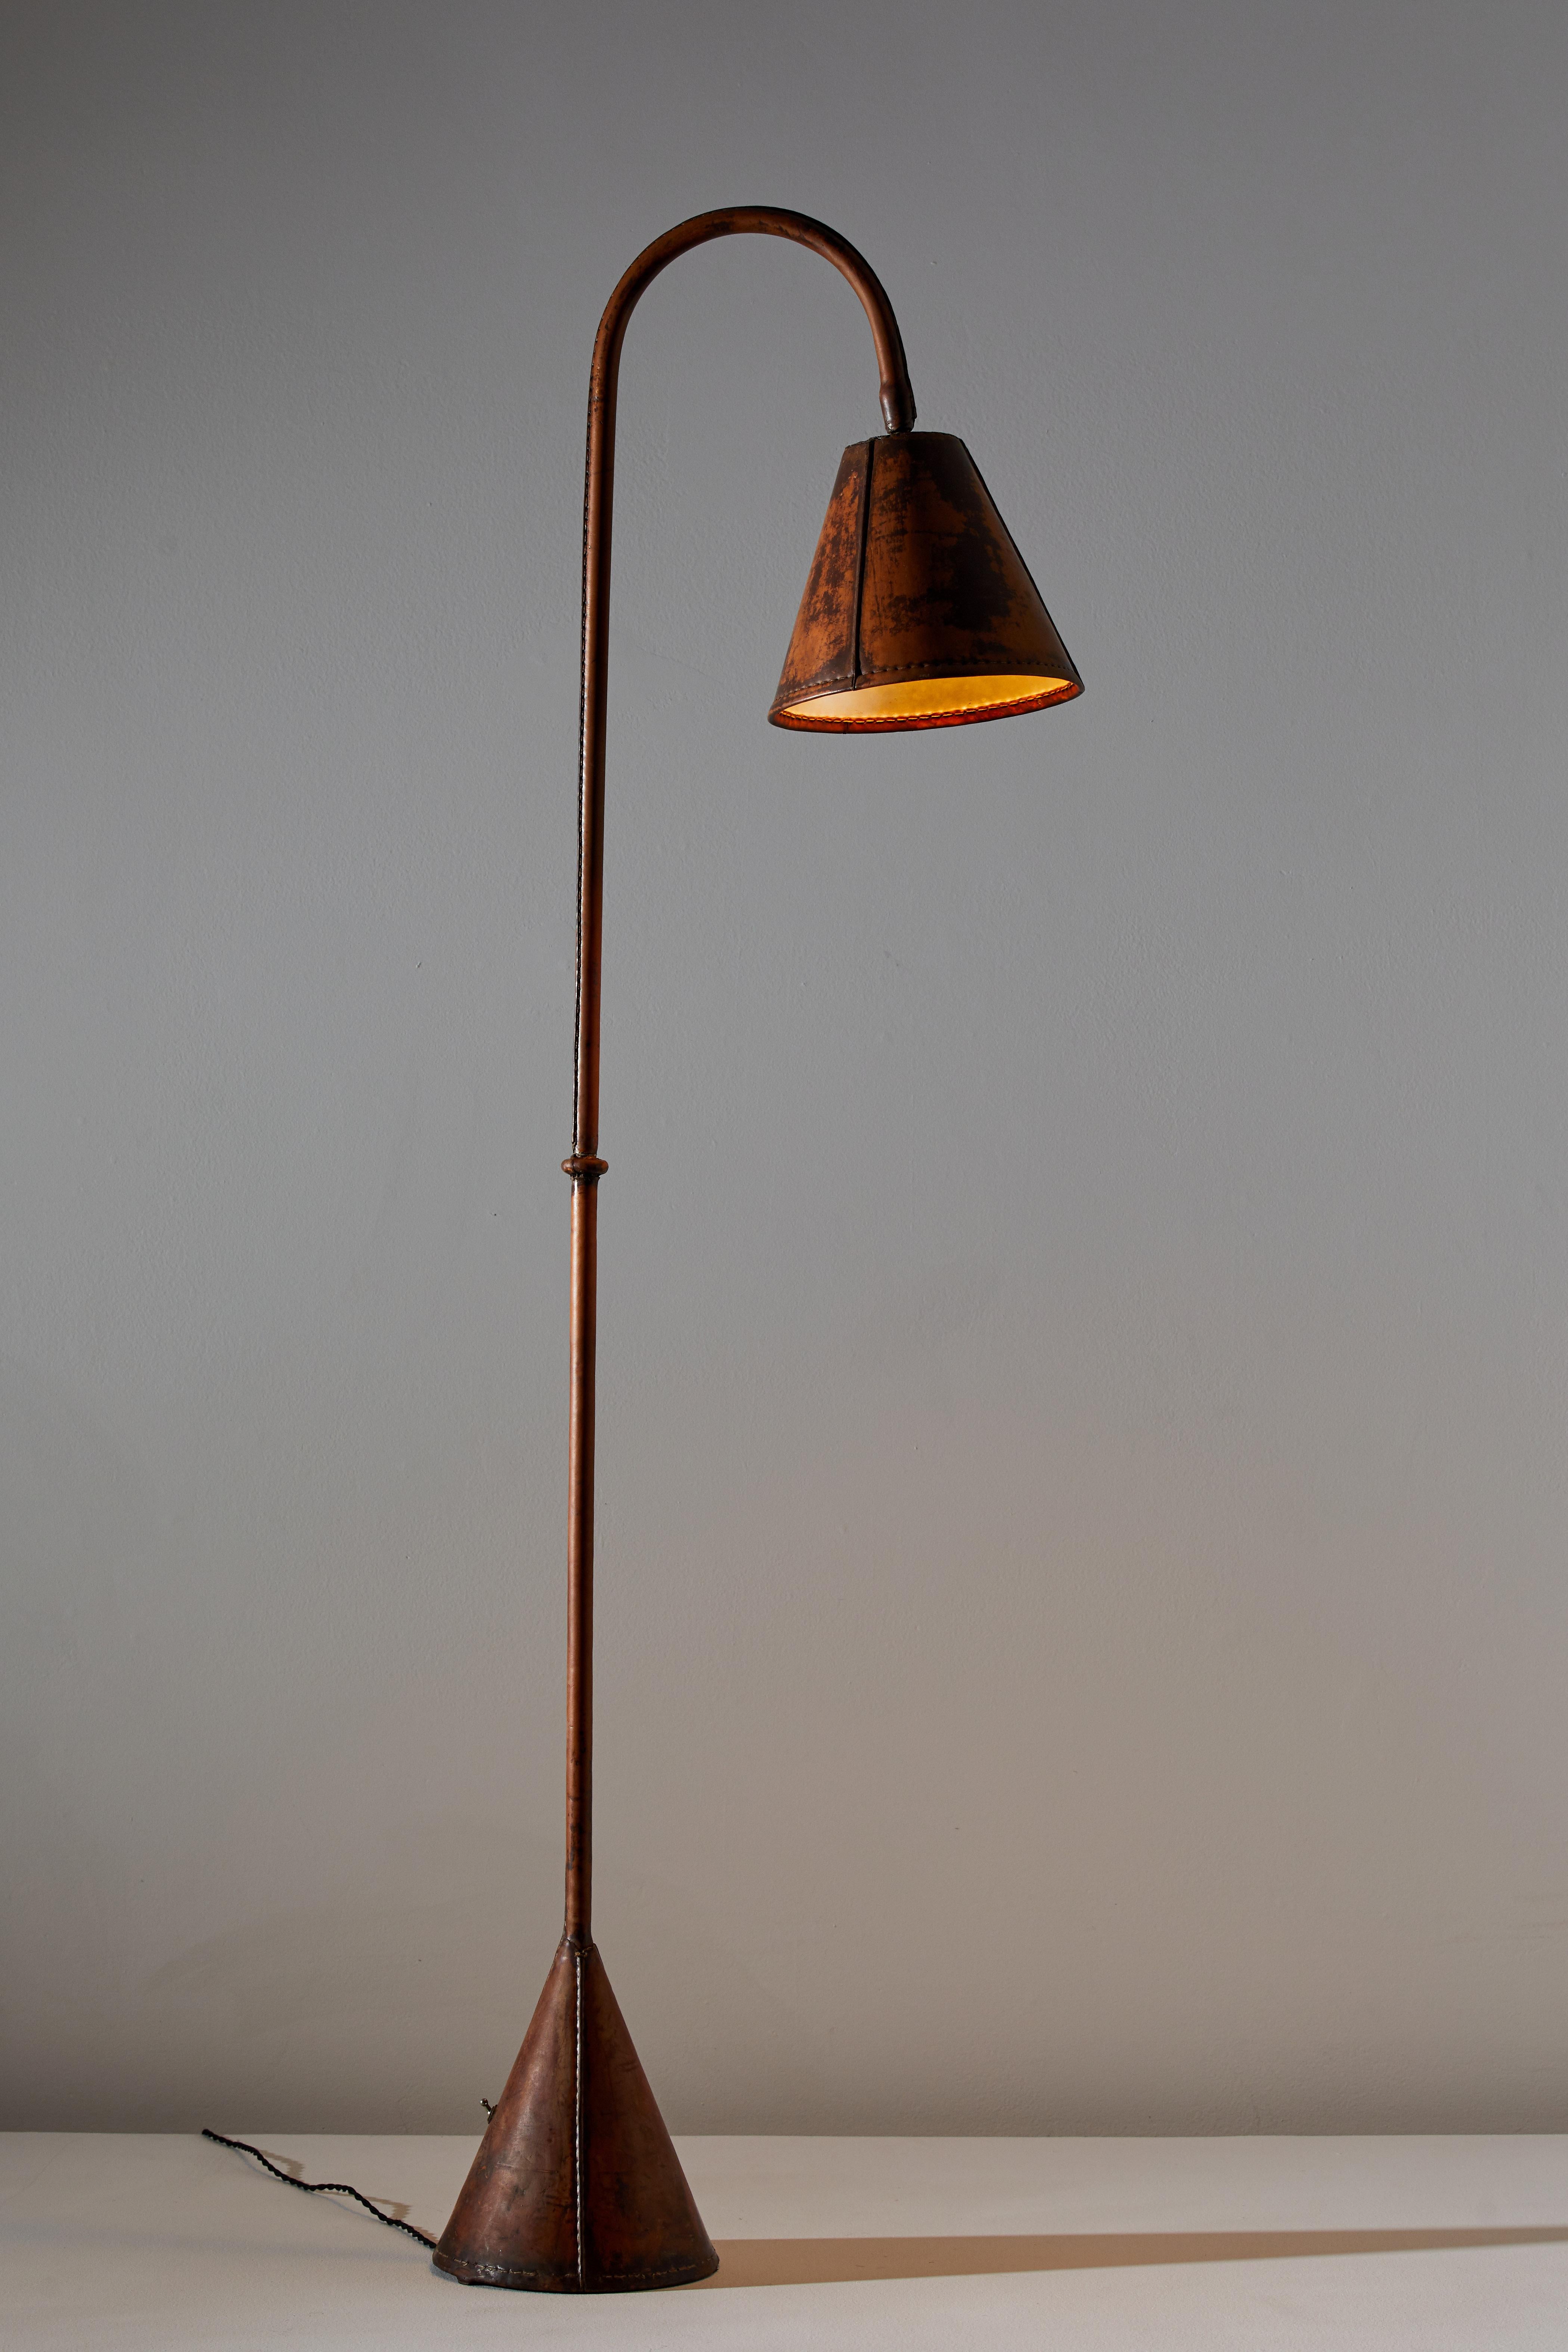 Floor lamp by Valenti. Manufactured in Spain, circa 1950s. Saddle-stitched distressed leather over steel. Shade articulates up/down and left/right. On/off switch on base of lamp. Rewired for U.S. sockets with black French twist cord. Takes one E27